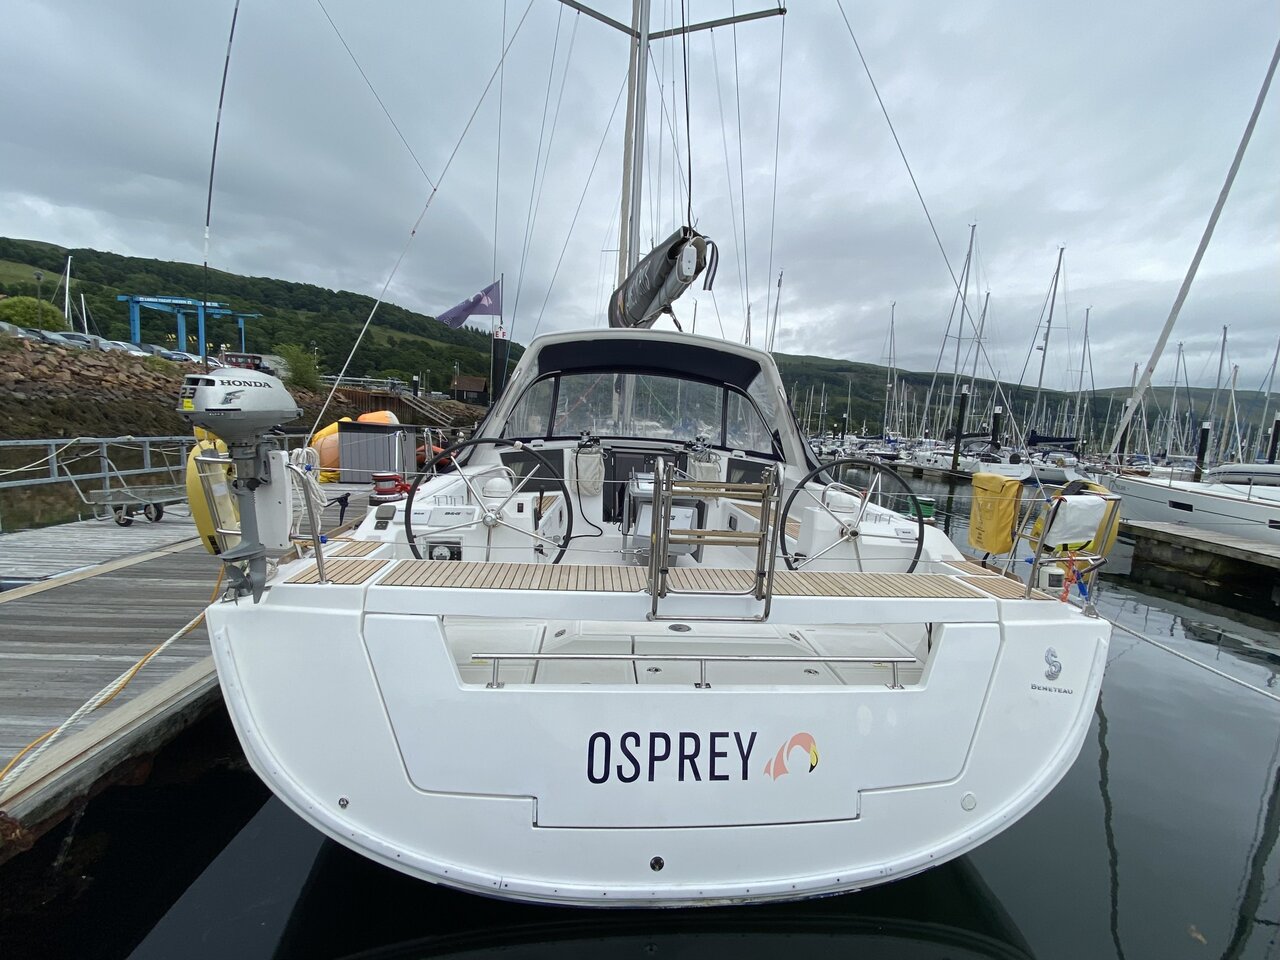 Oceanis 45 - 4 cab. - Yacht Charter Largs & Boat hire in United Kingdom Scotland Firth of Clyde Largs Largs Yacht Haven 1